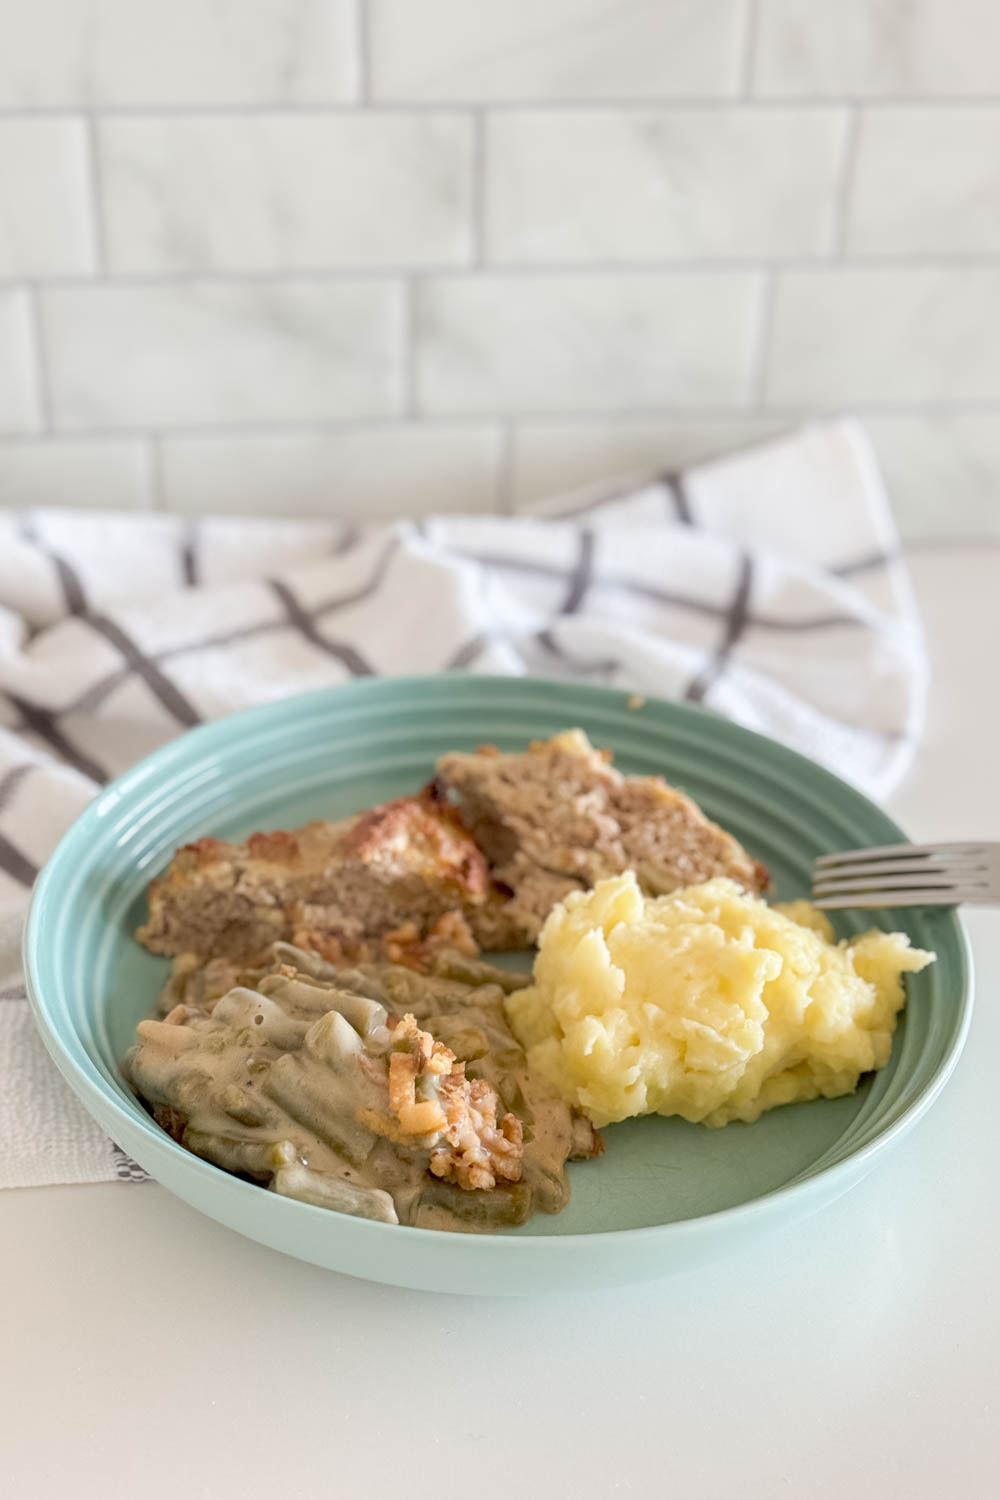 Presenting our ground turkey meatloaf on a platter with side dishes